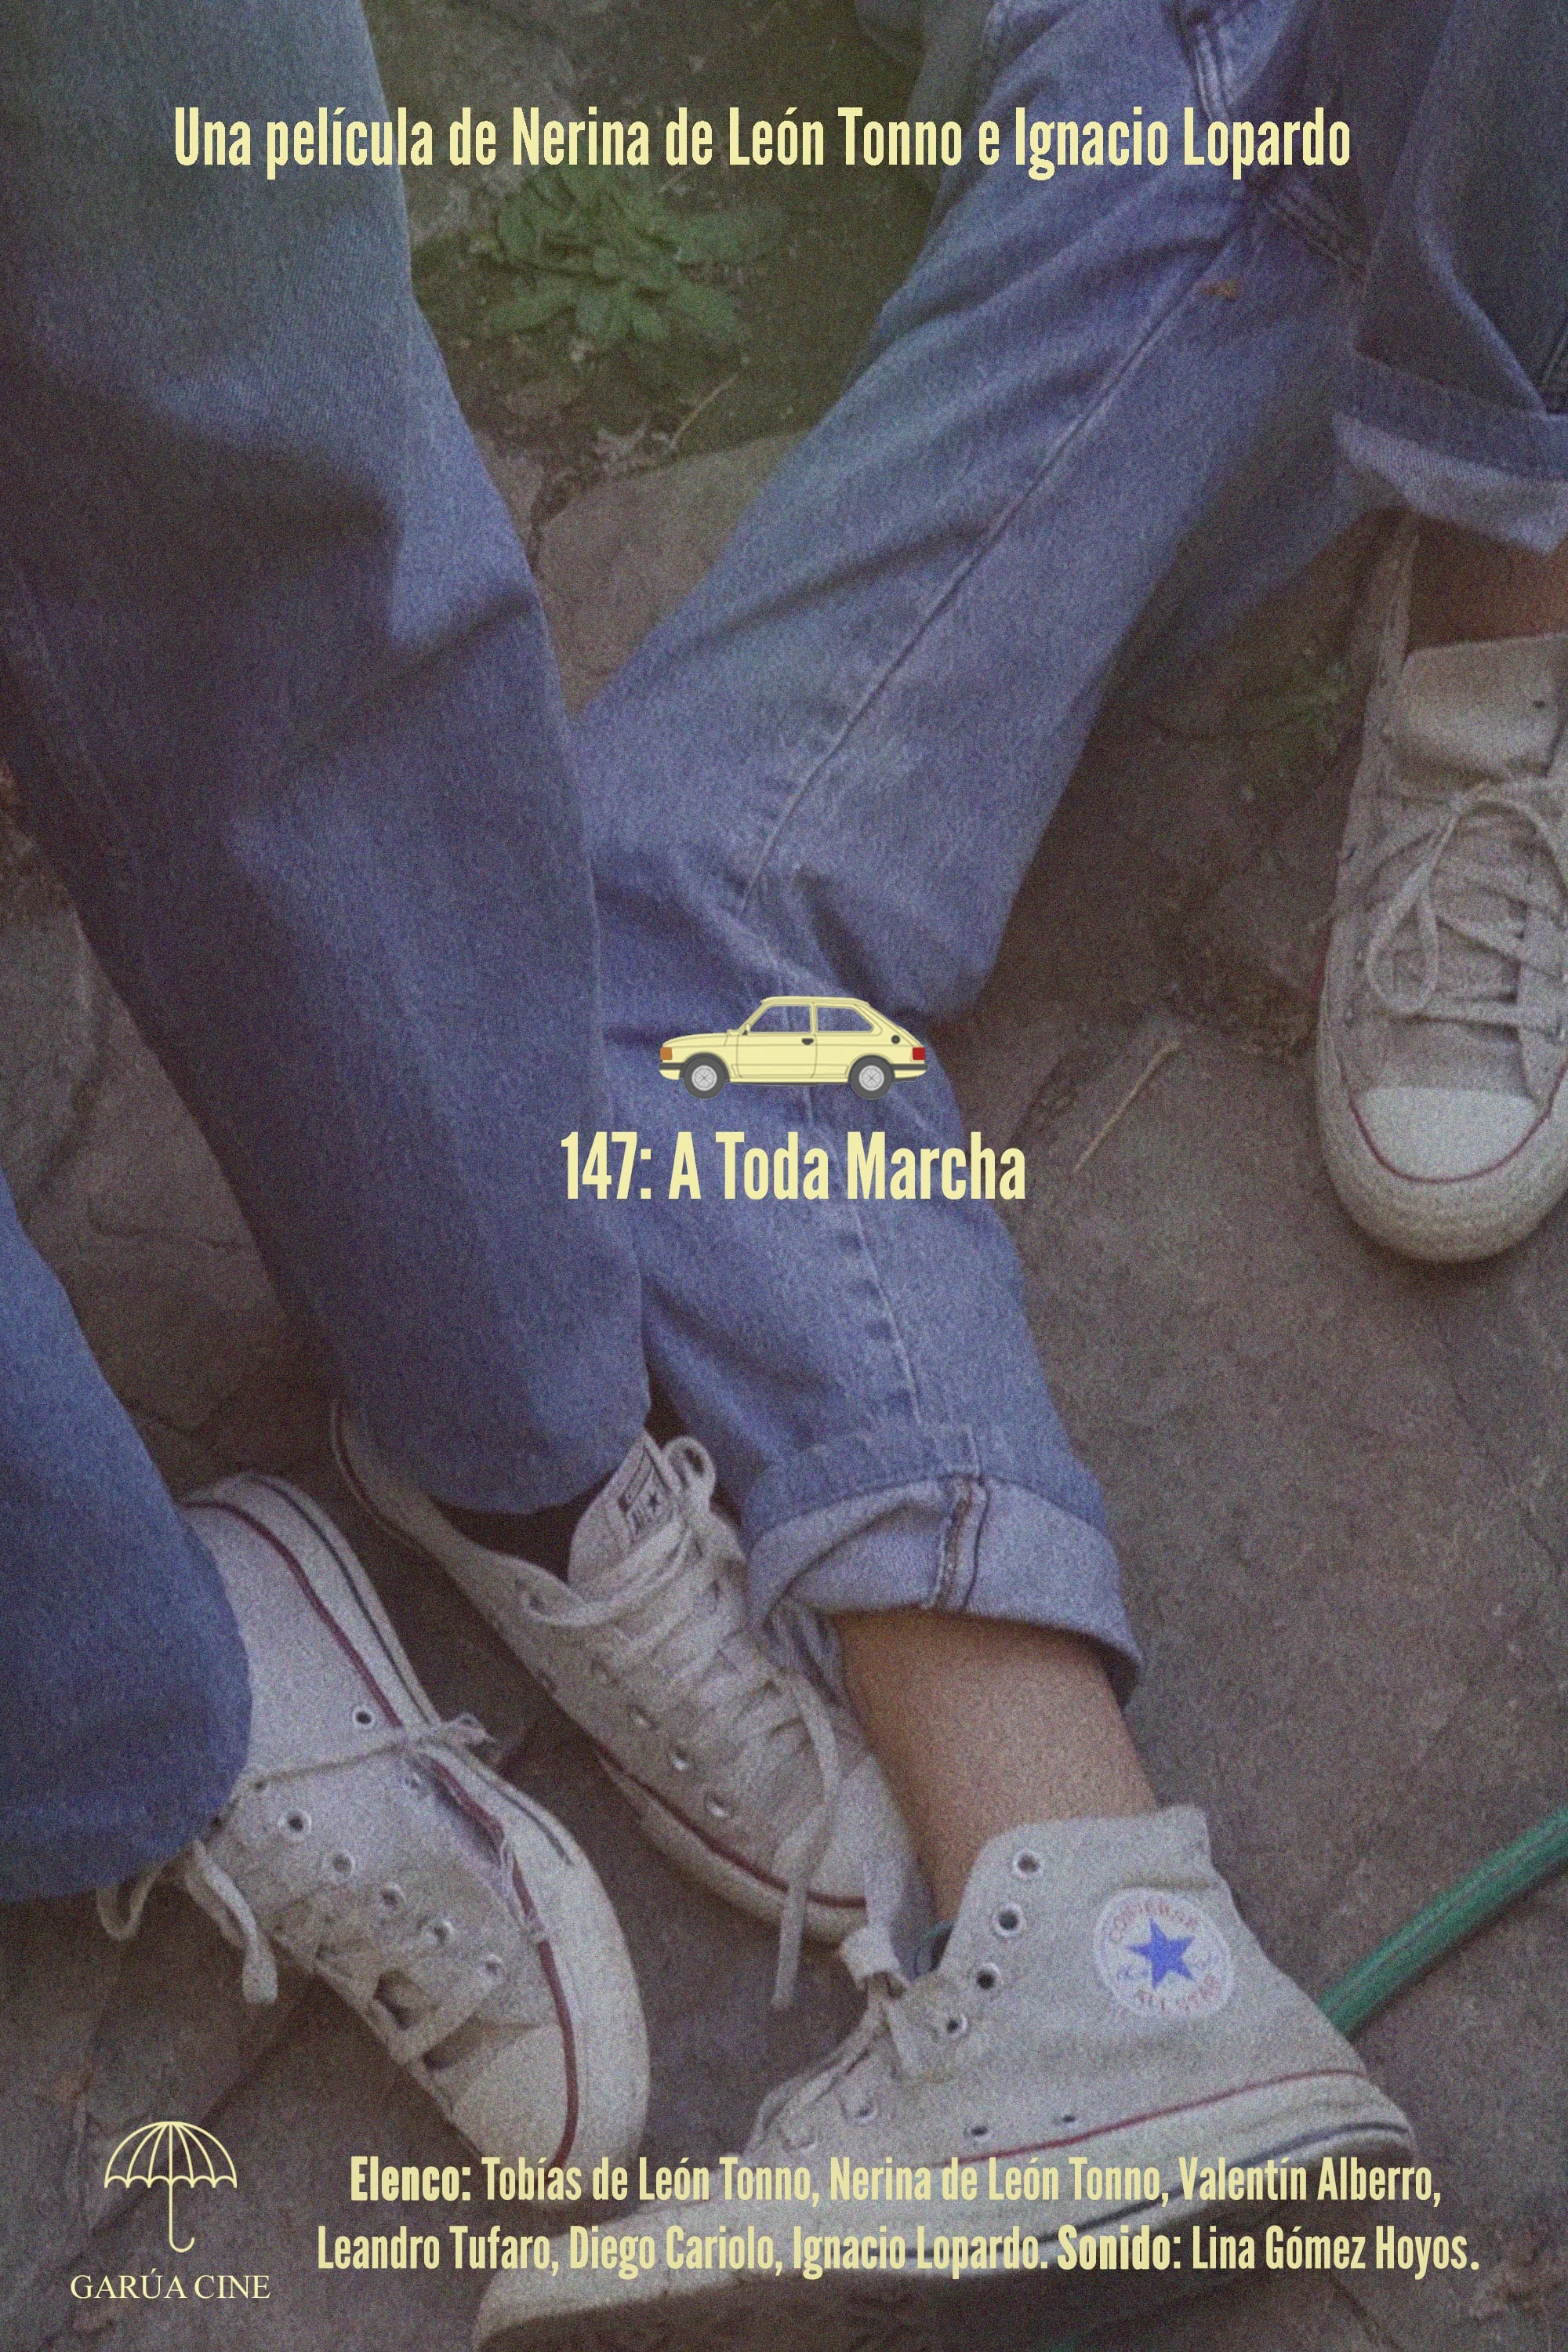 147: A toda marcha